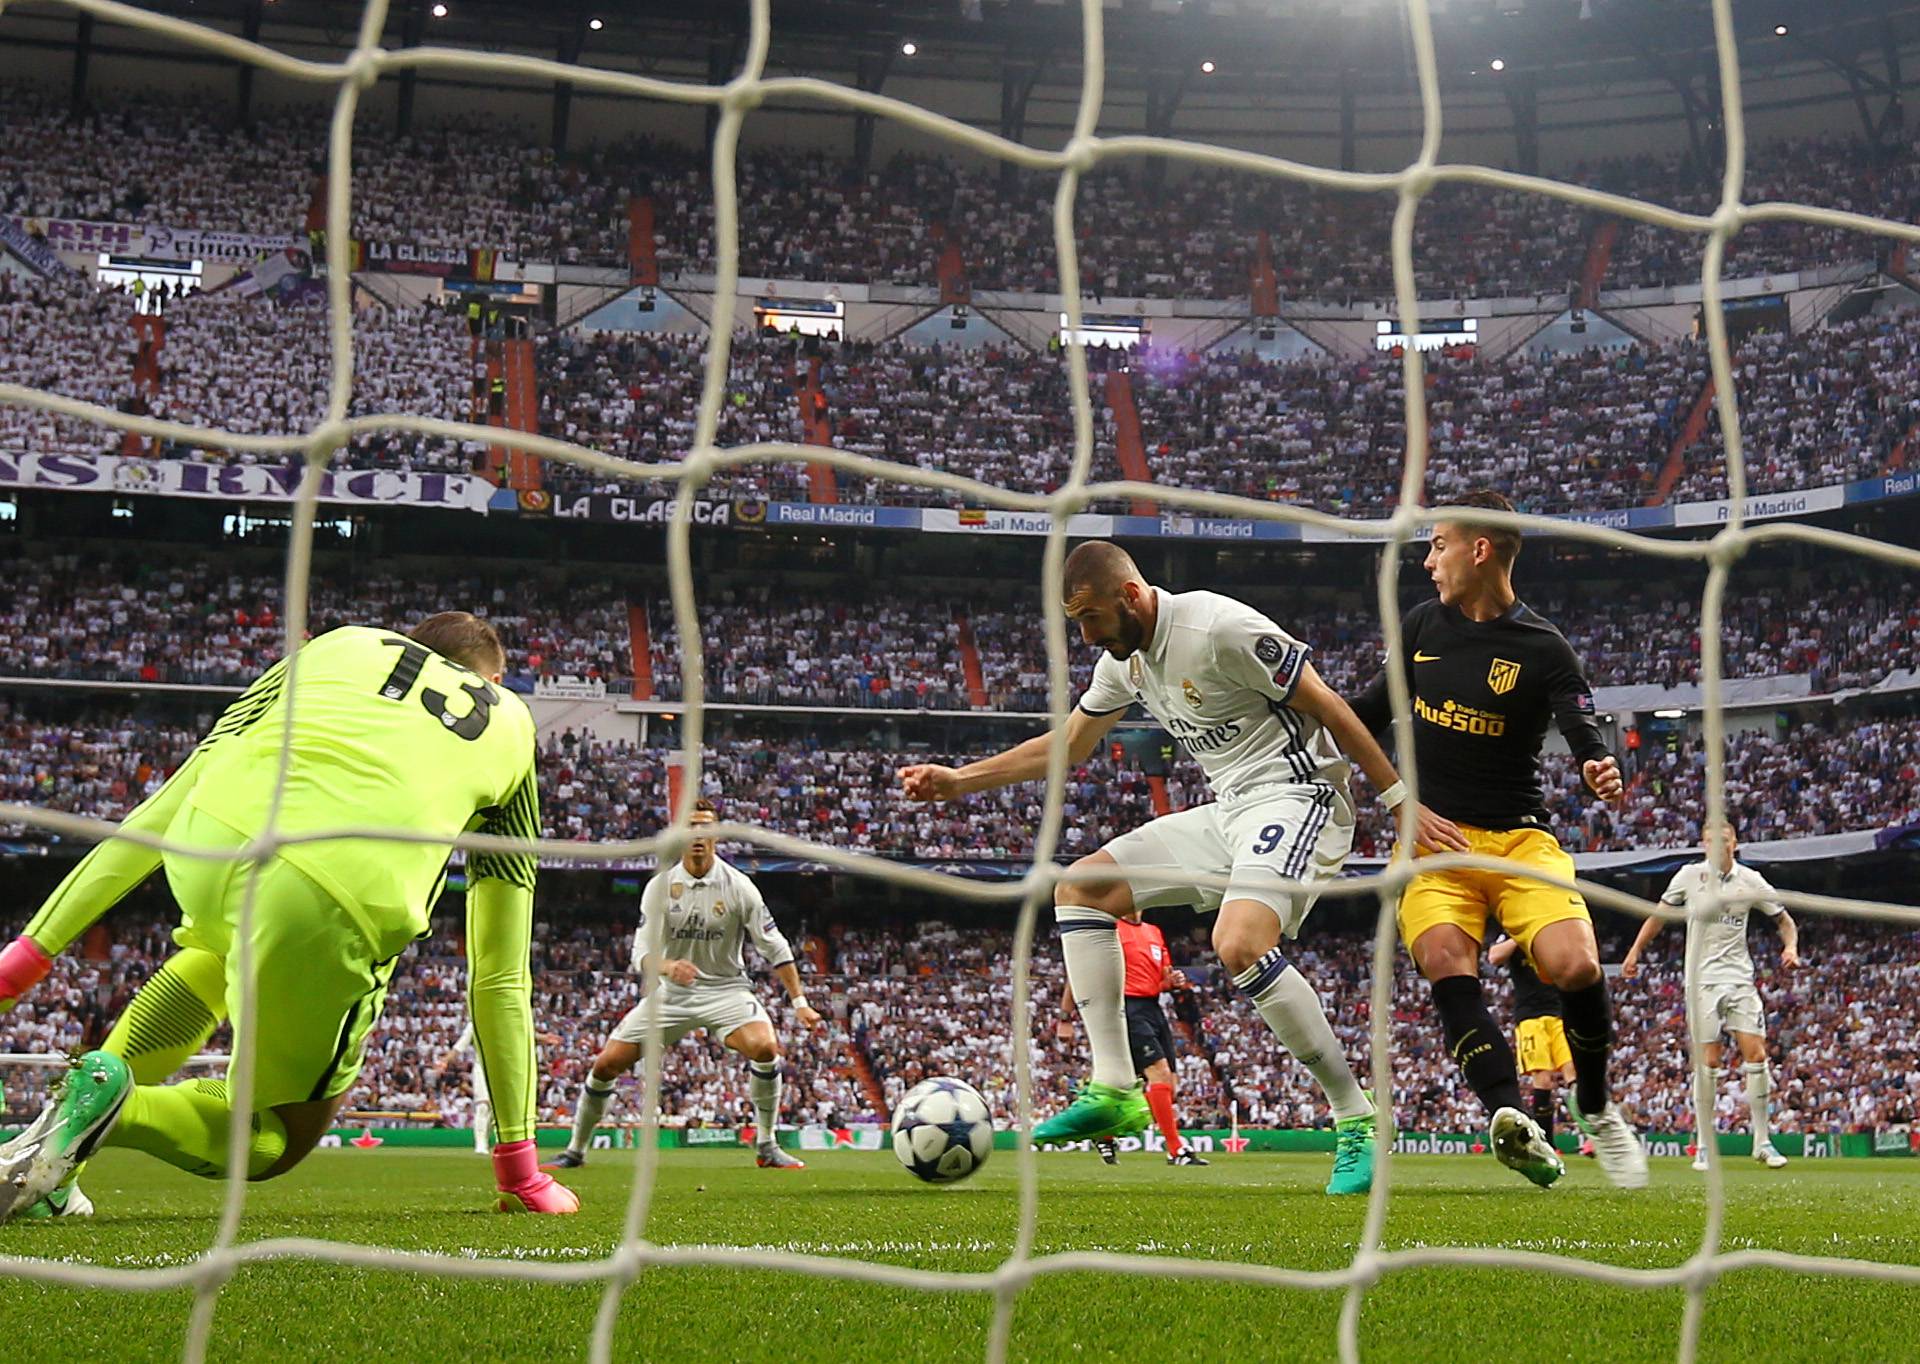 Real Madrid's Karim Benzema misses a chance to score